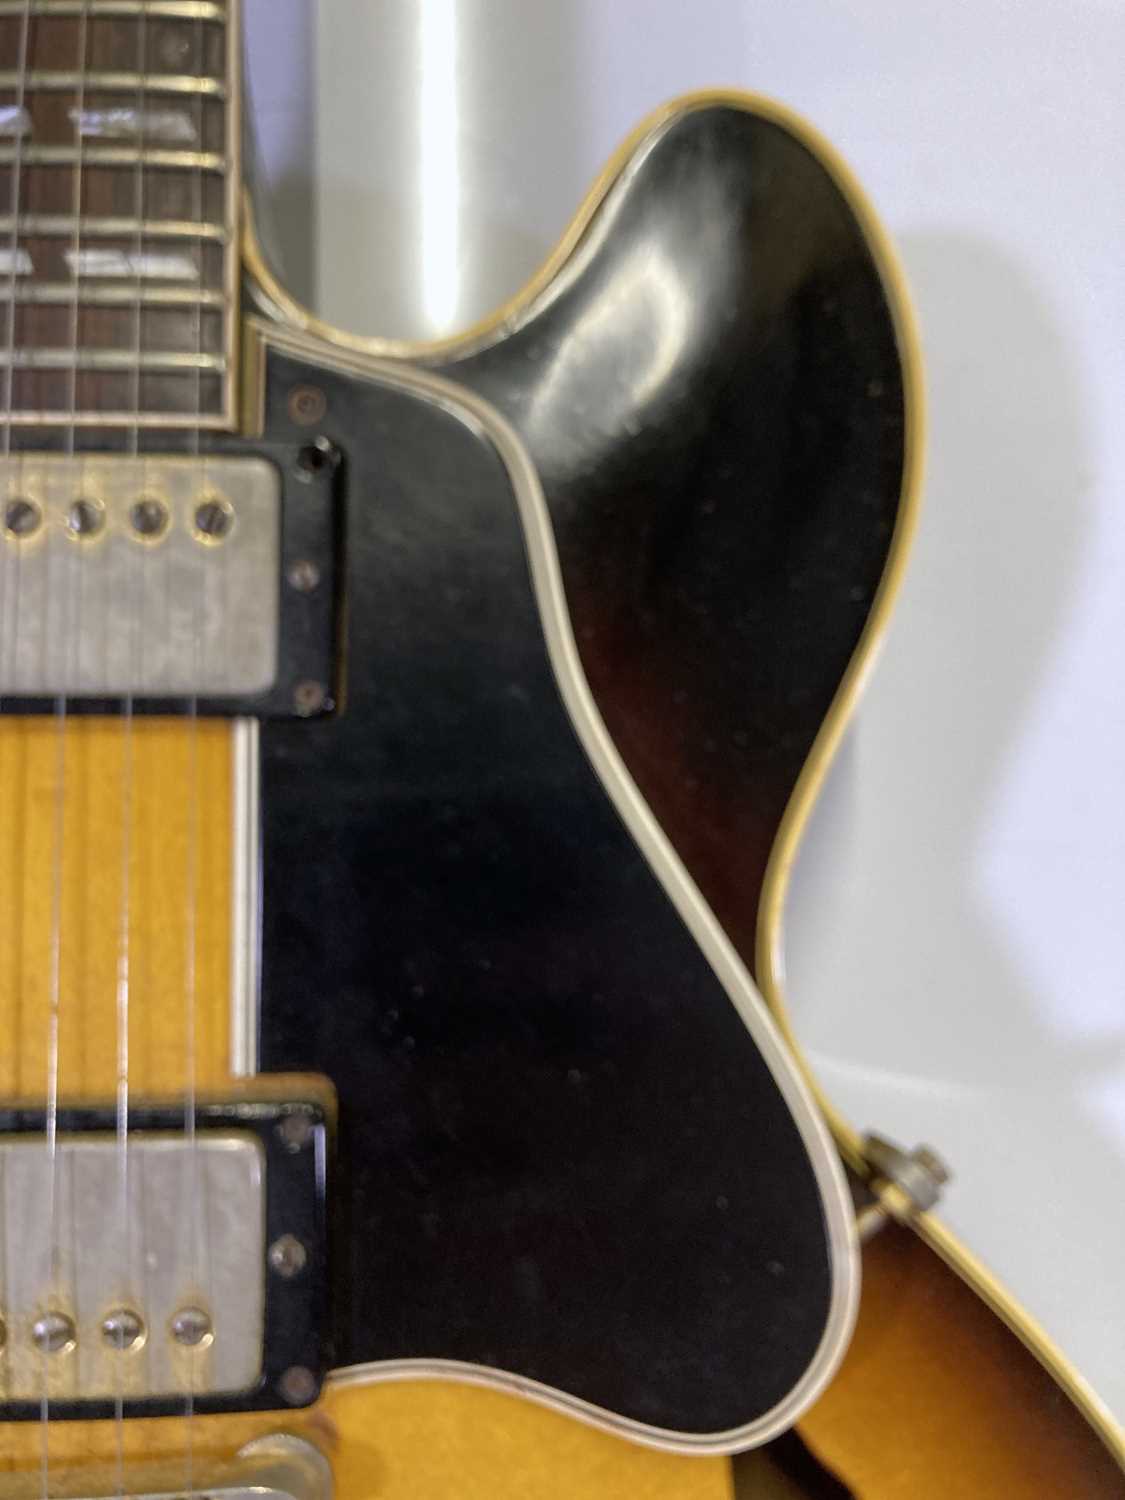 GIBSON - A 1964 ES345 STDV HOLLOW BODY ELECTRIC GUITAR. - Image 10 of 29